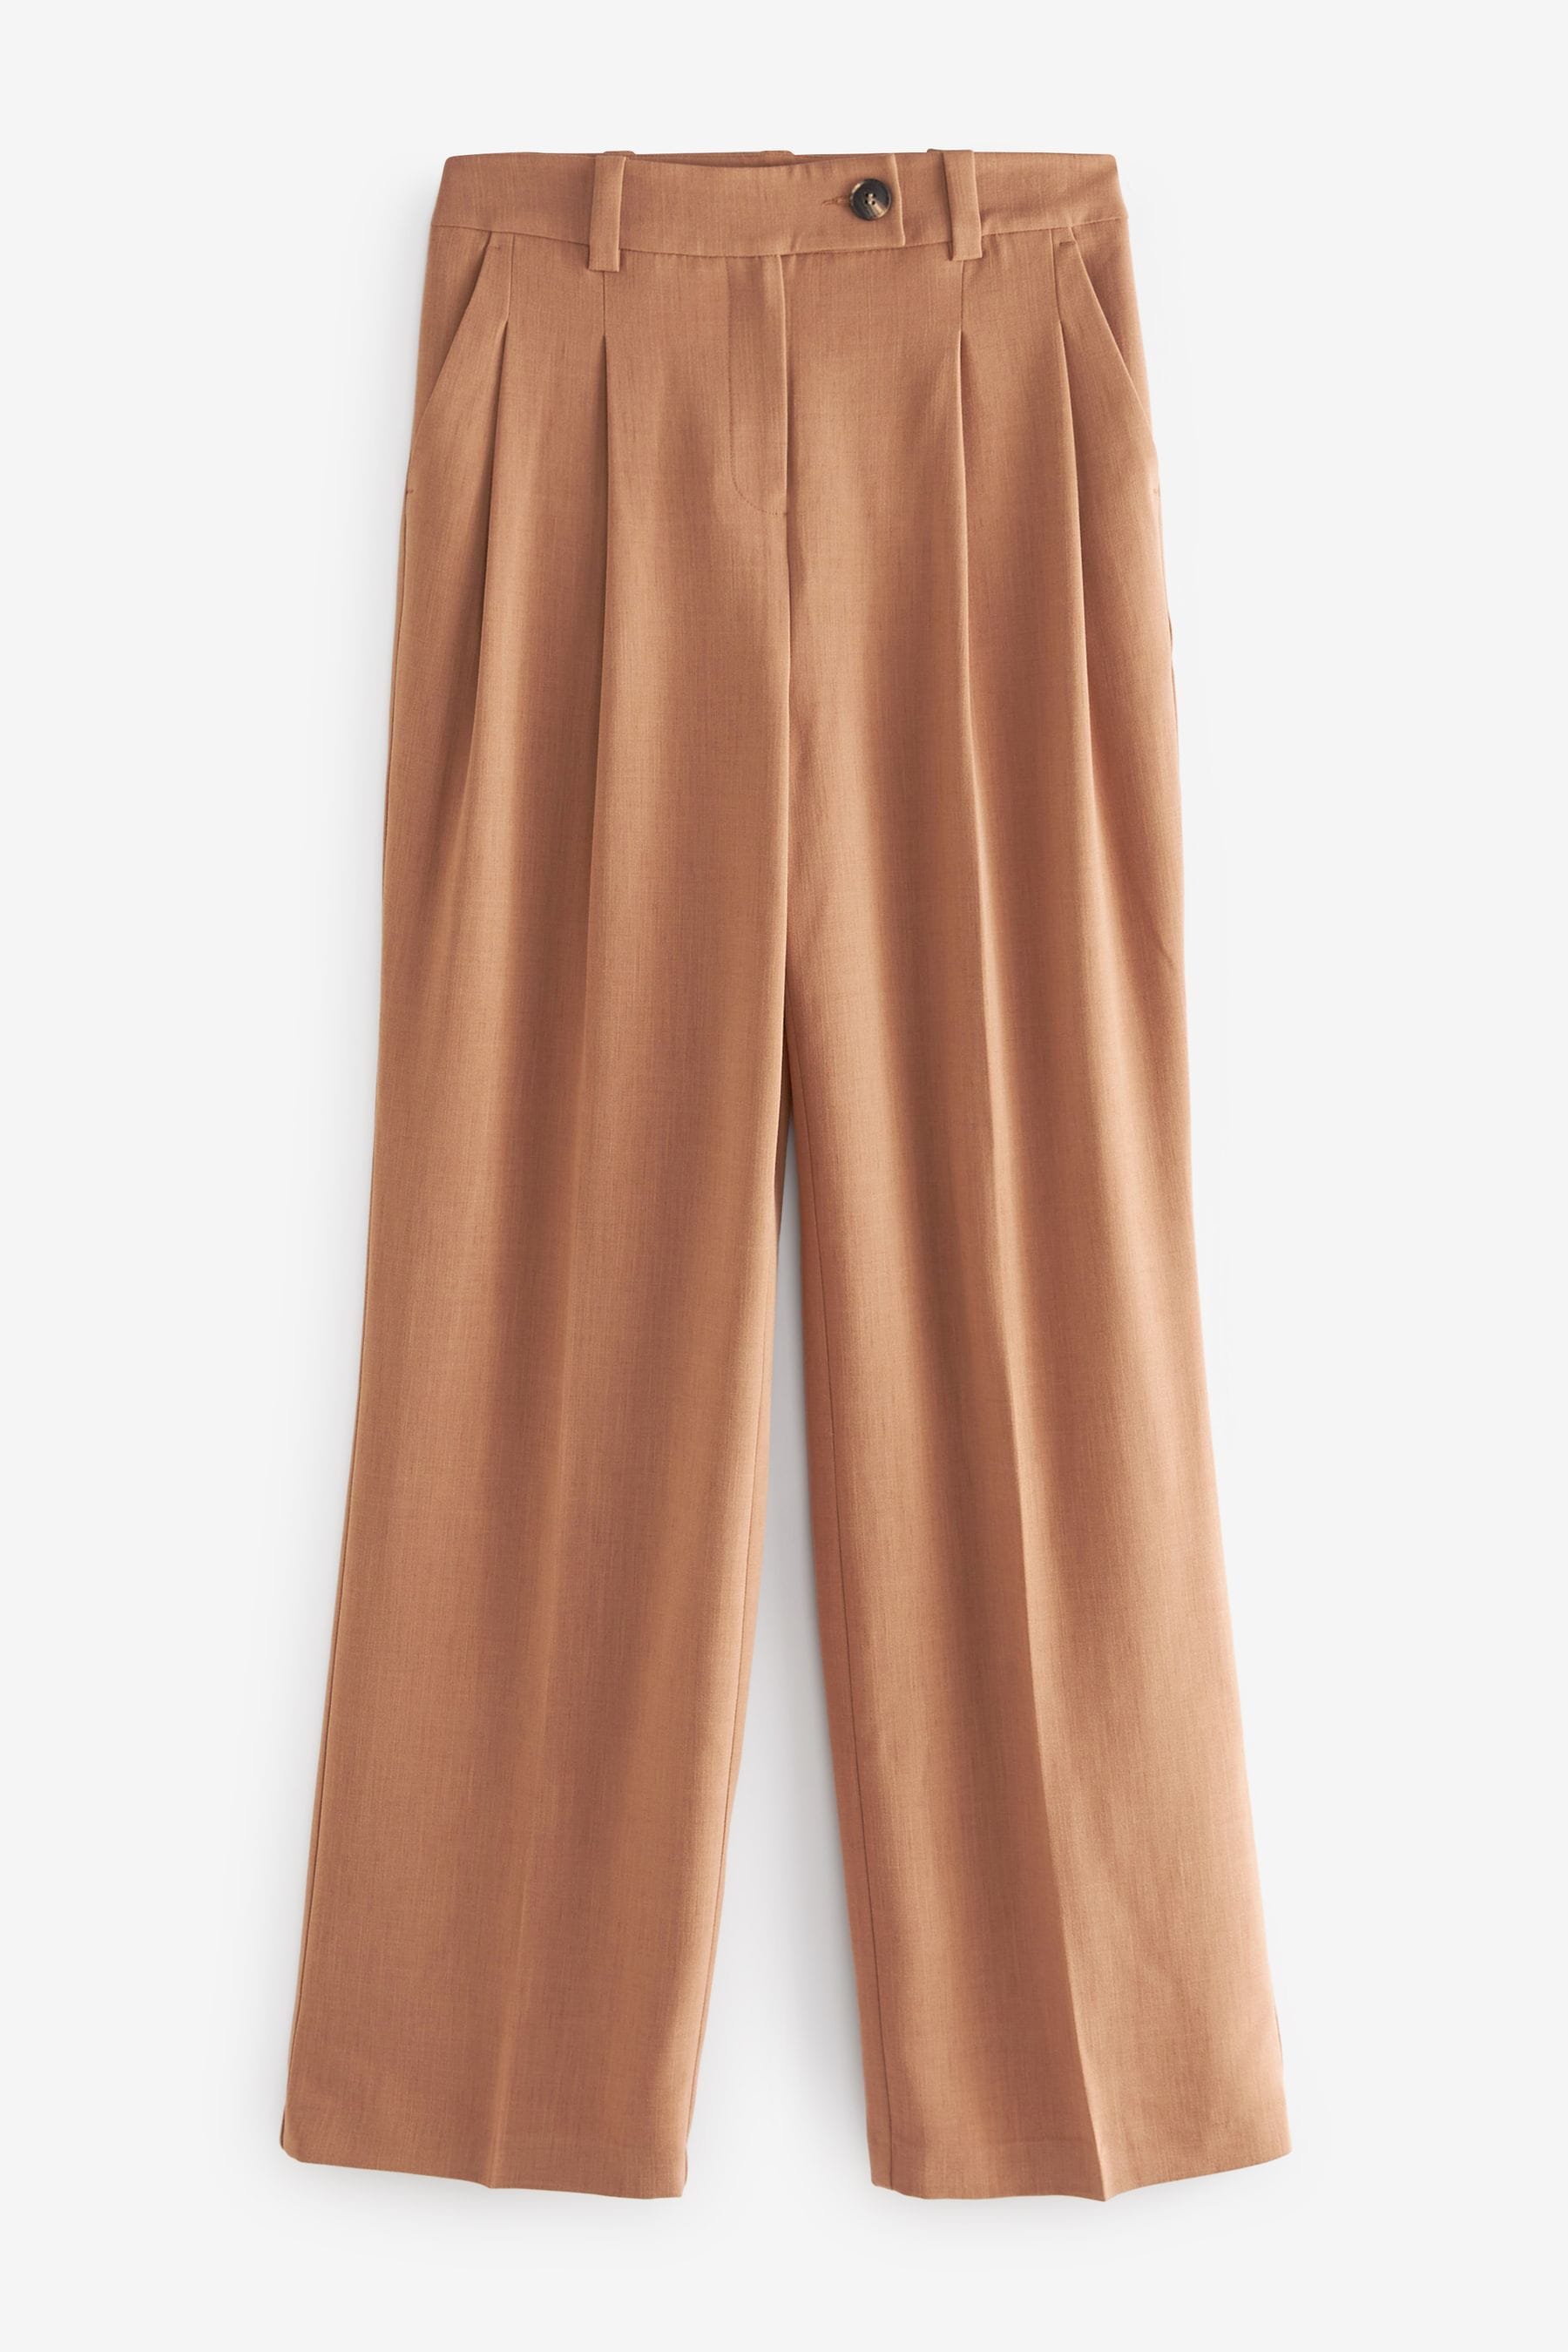 Next Camel Natural Pleated Front Wide Leg Trousers